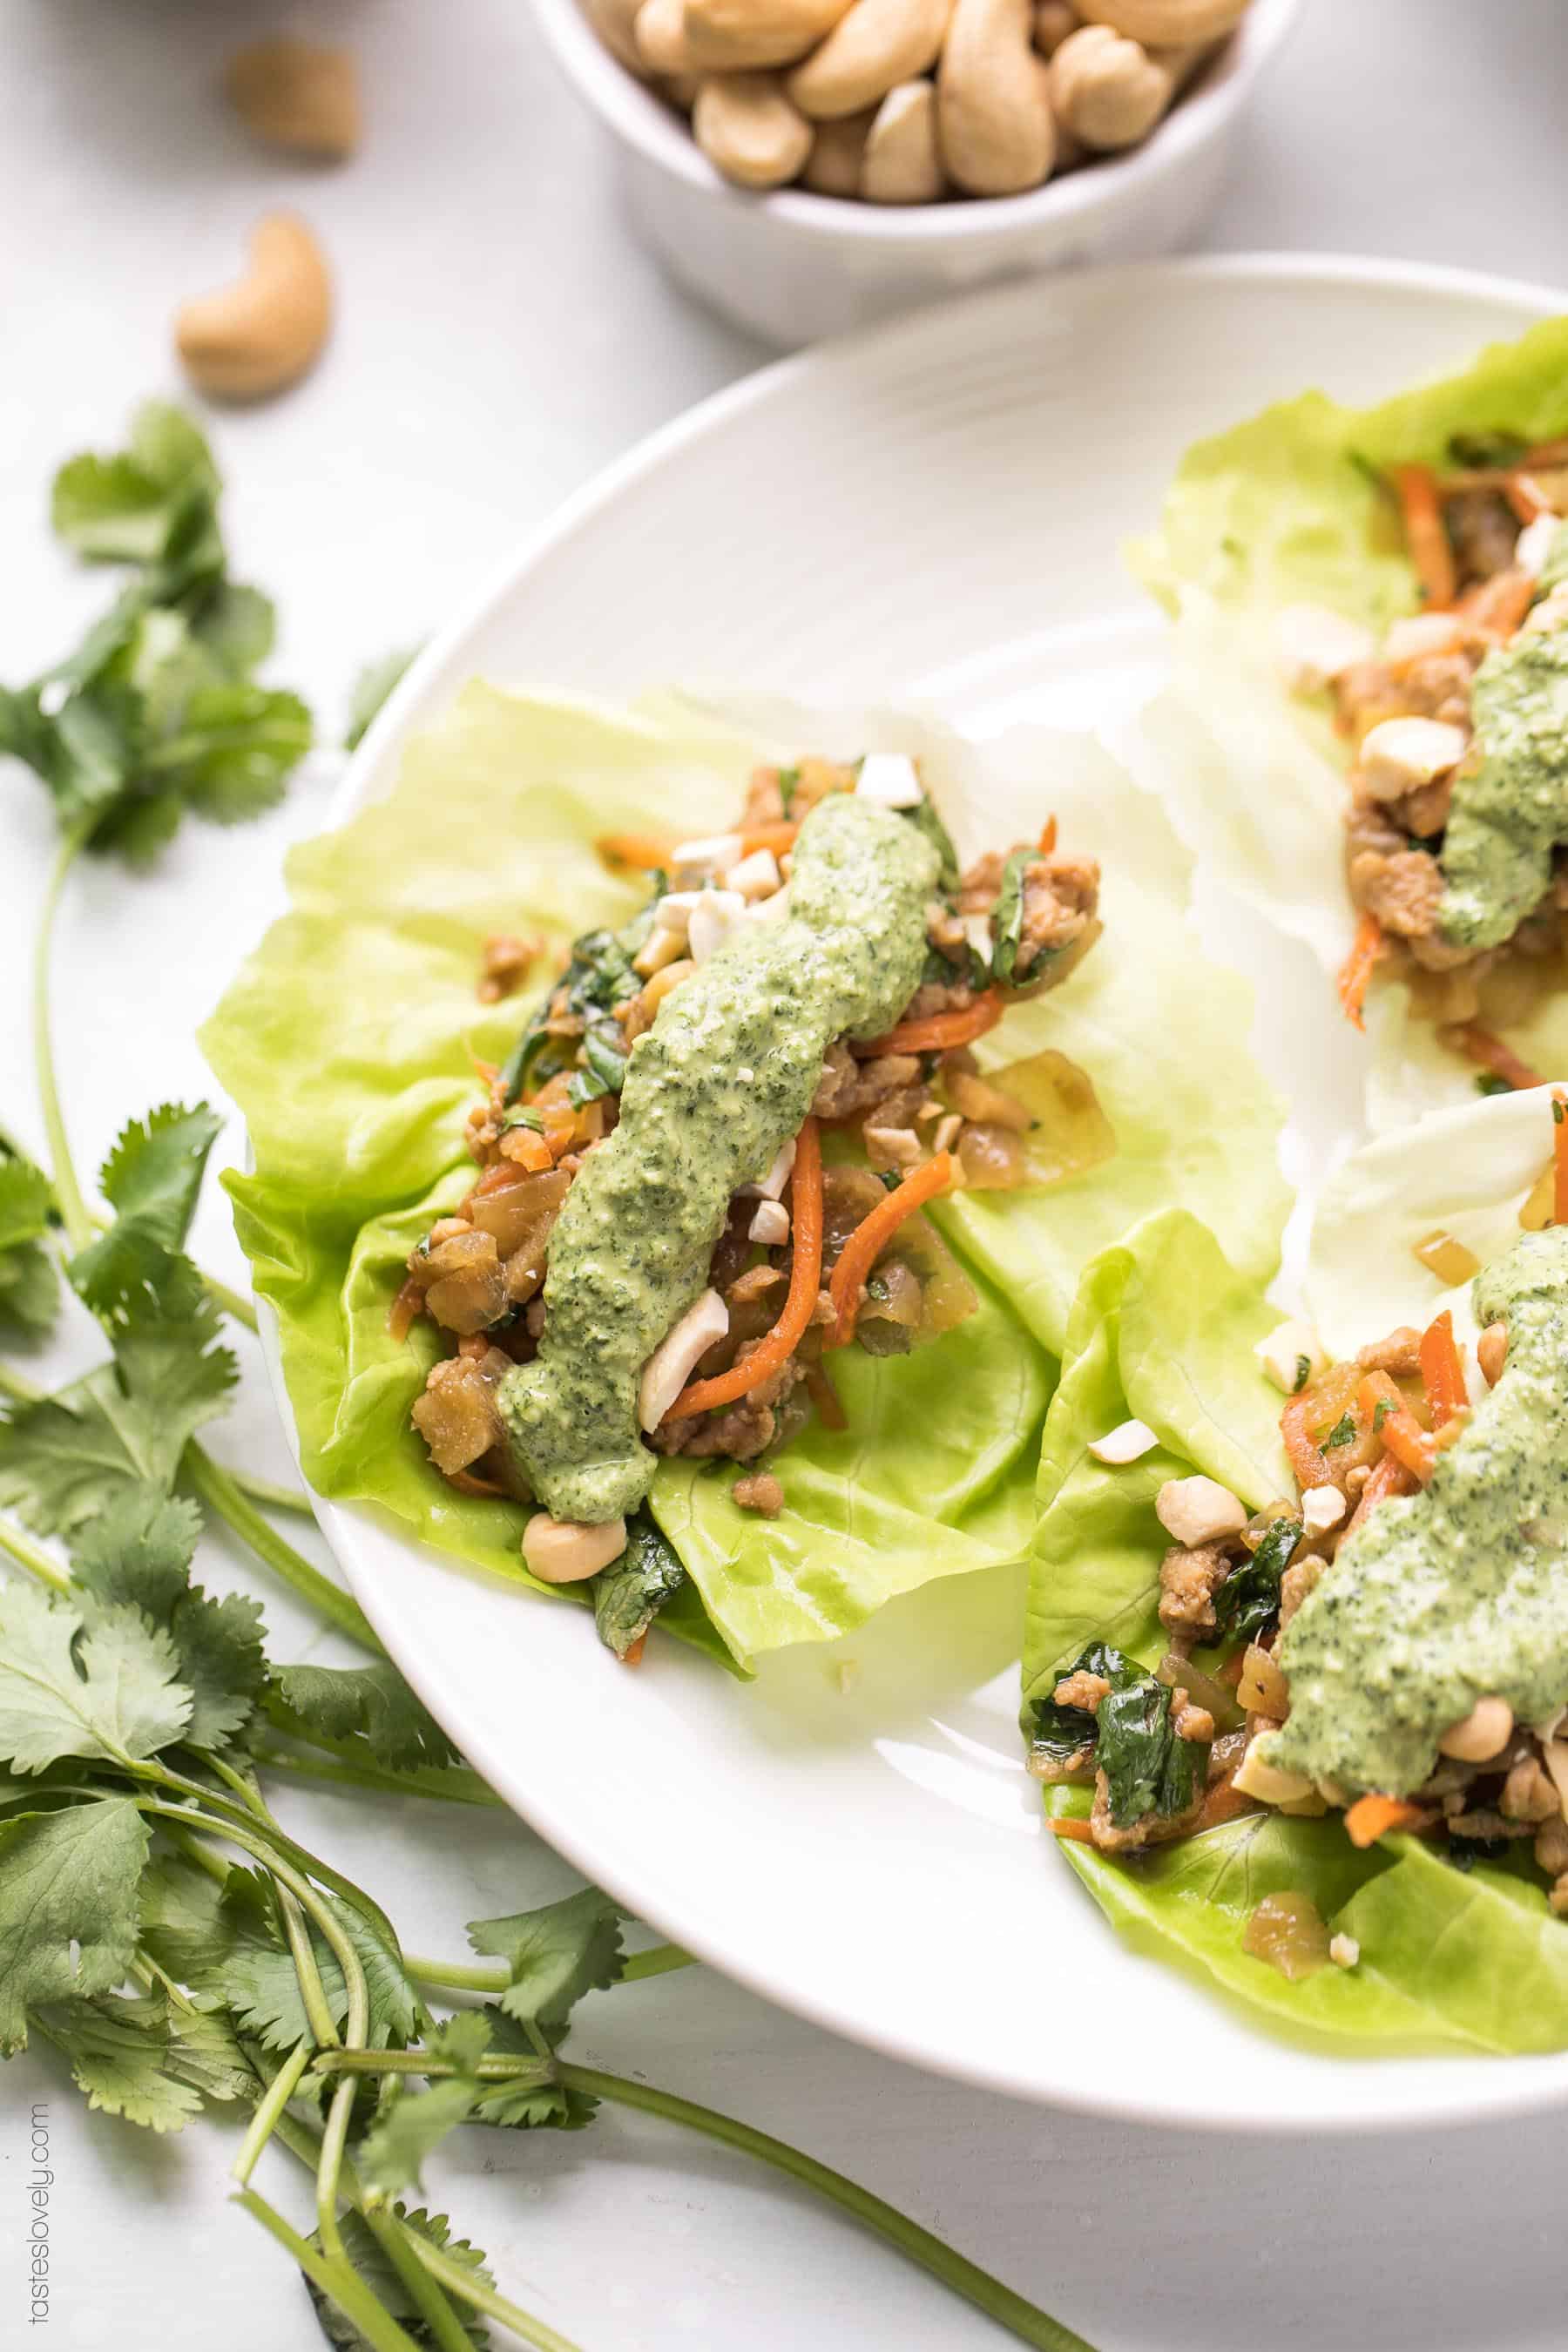 Paleo + Whole30 Thai Chicken Lettuce Wraps - a quick and healthy dinner recipe with ground chicken, sauteed onions, a thai sauce, cilantro and shredded carrots. Topped with a bright and fresh herby green dressing and cashews. #paleo #whole30 #glutenfree #grainfree #dairyfree #sugarfree #keto #cleaneating #realfood